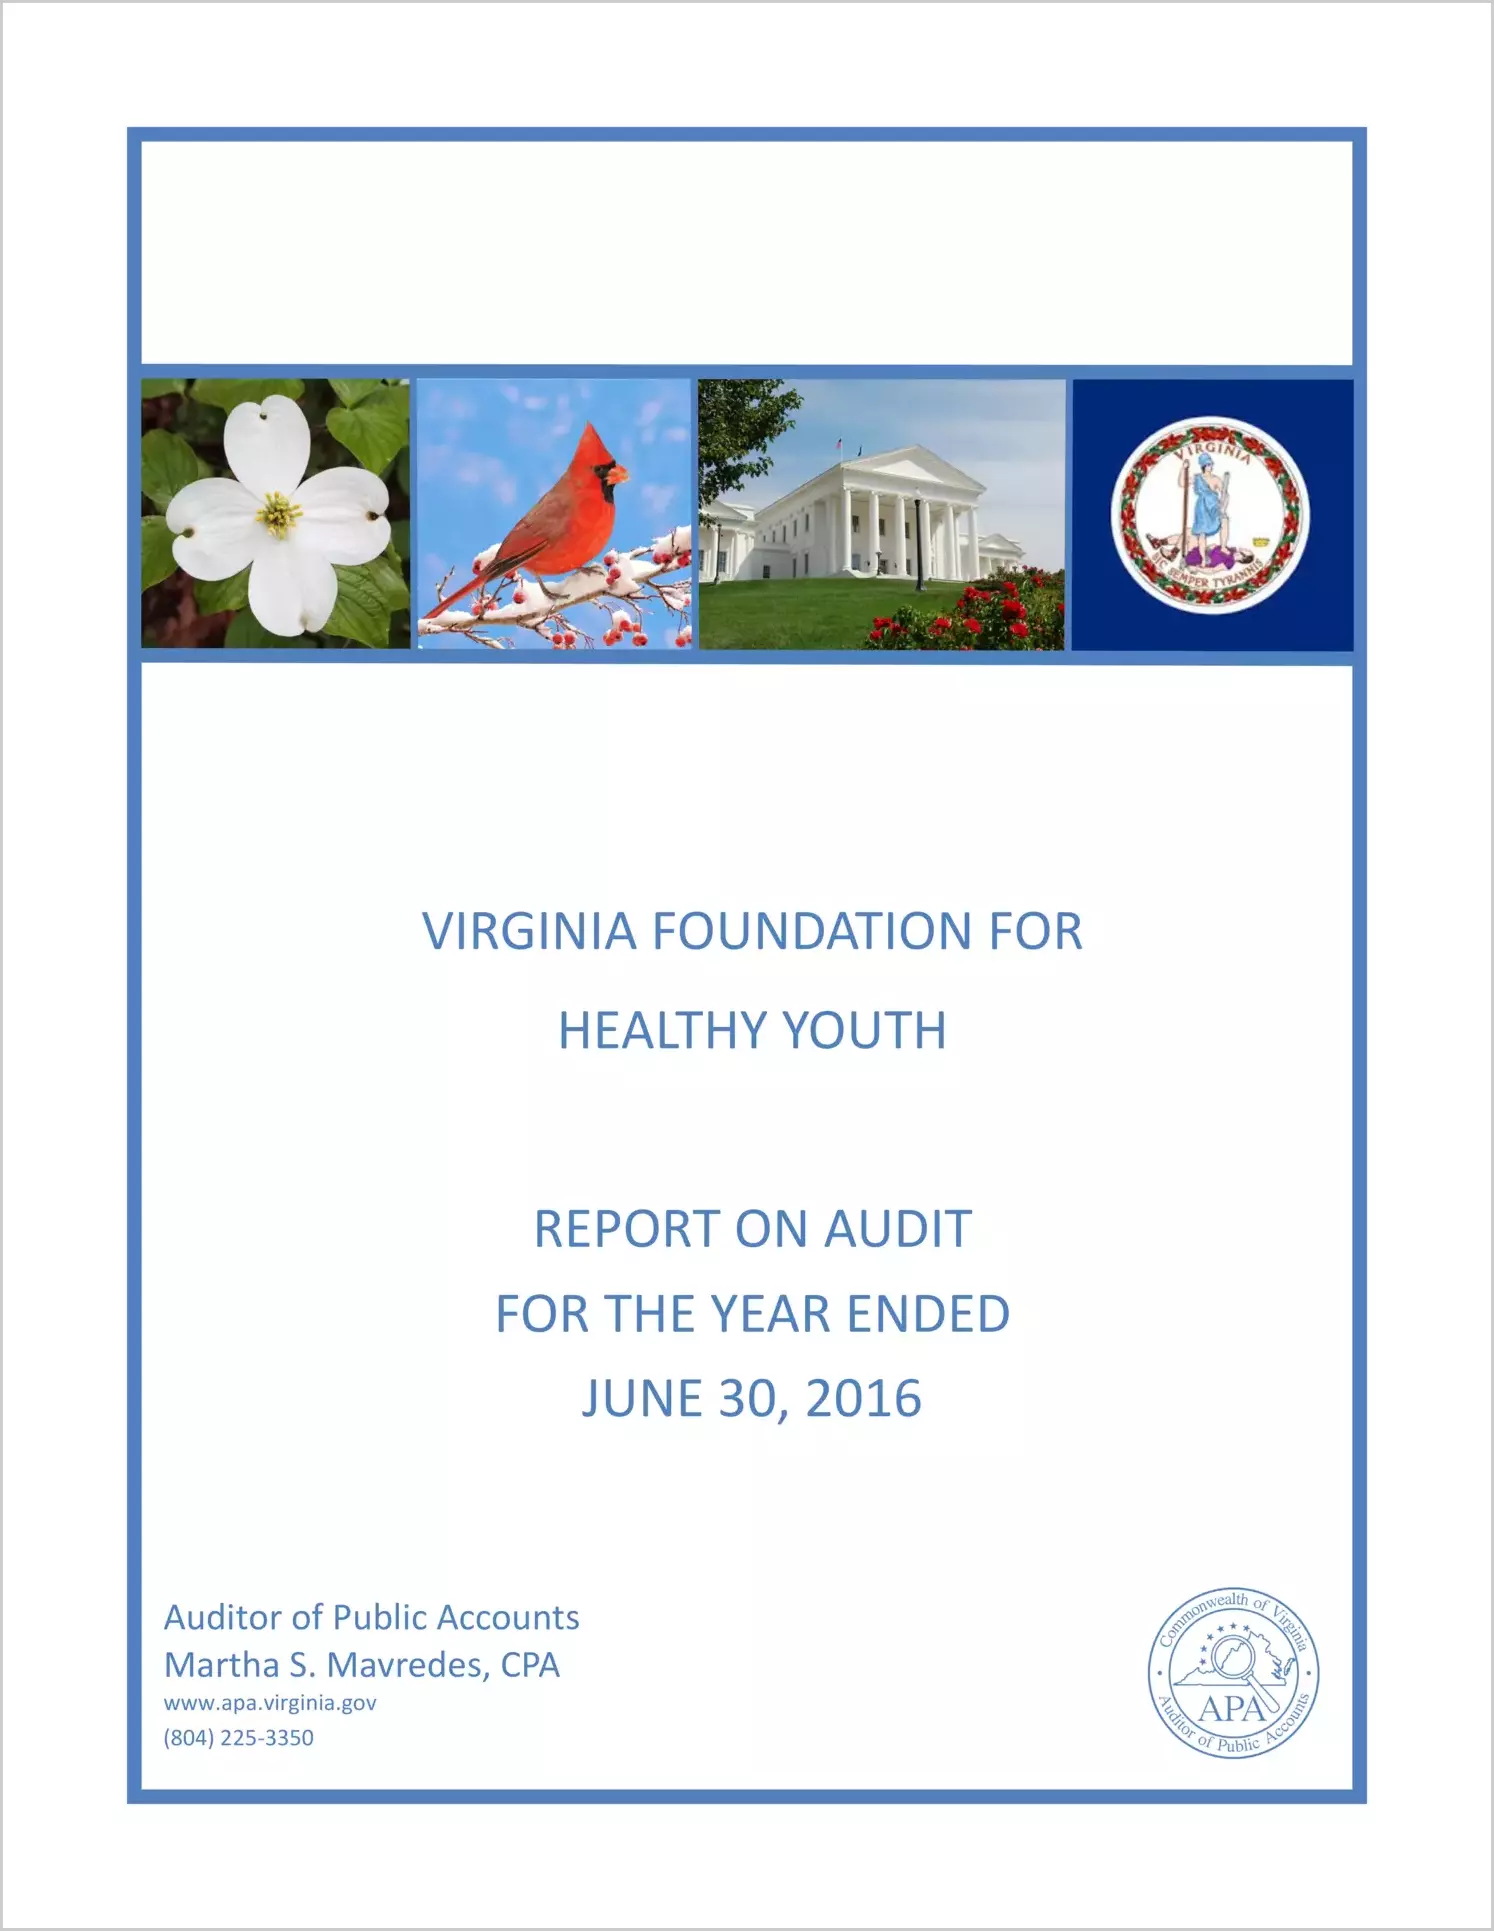 Virginia Foundation for Healthy Youth for the year ended June 30, 2016